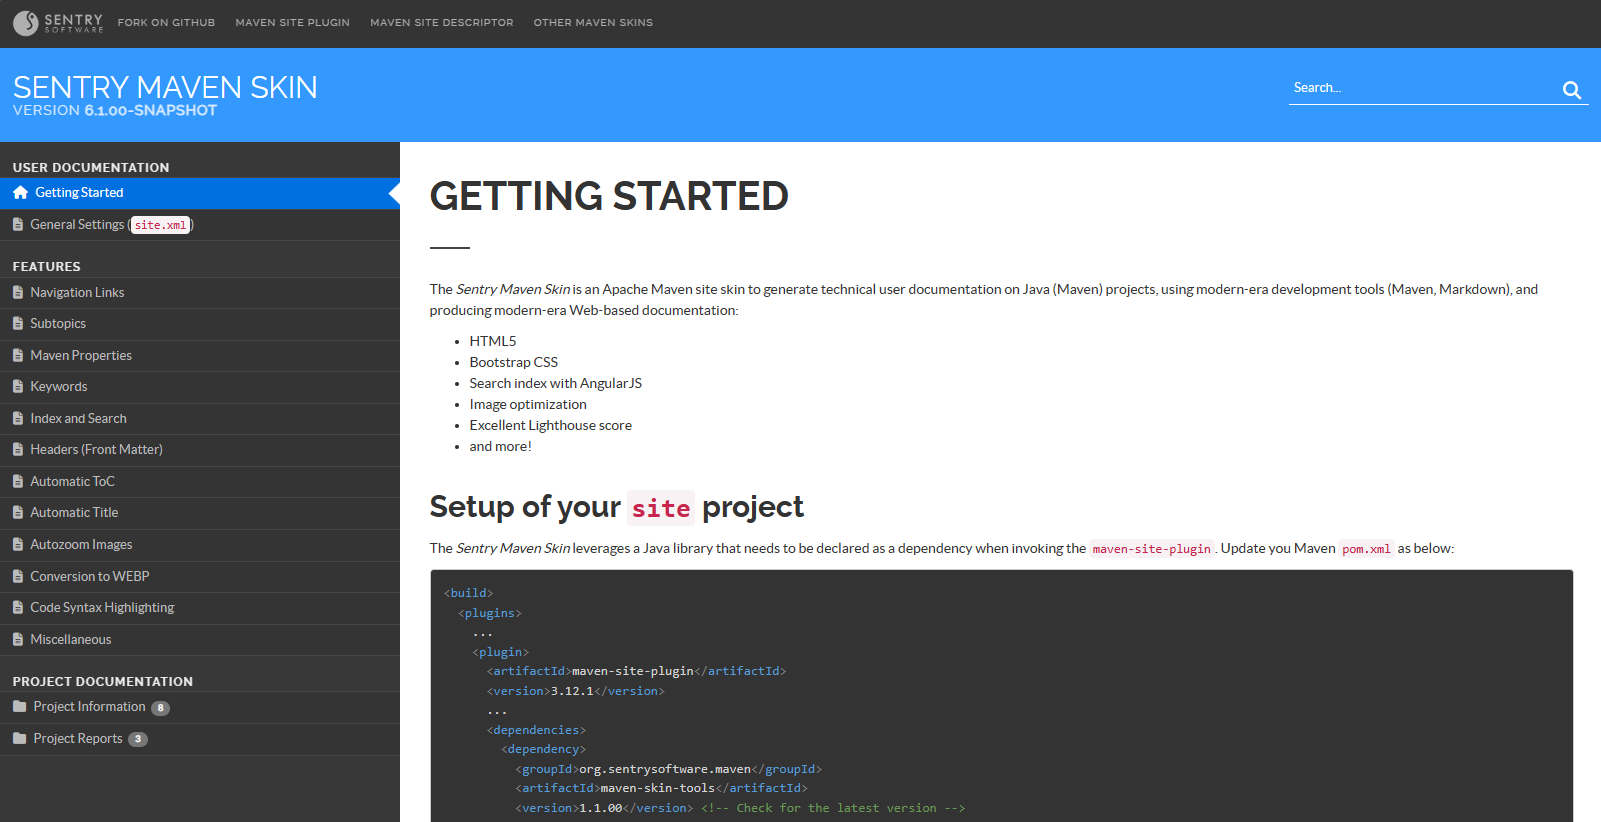 Screenshot of an example Maven project using the Sentry Maven Skin to build its site.